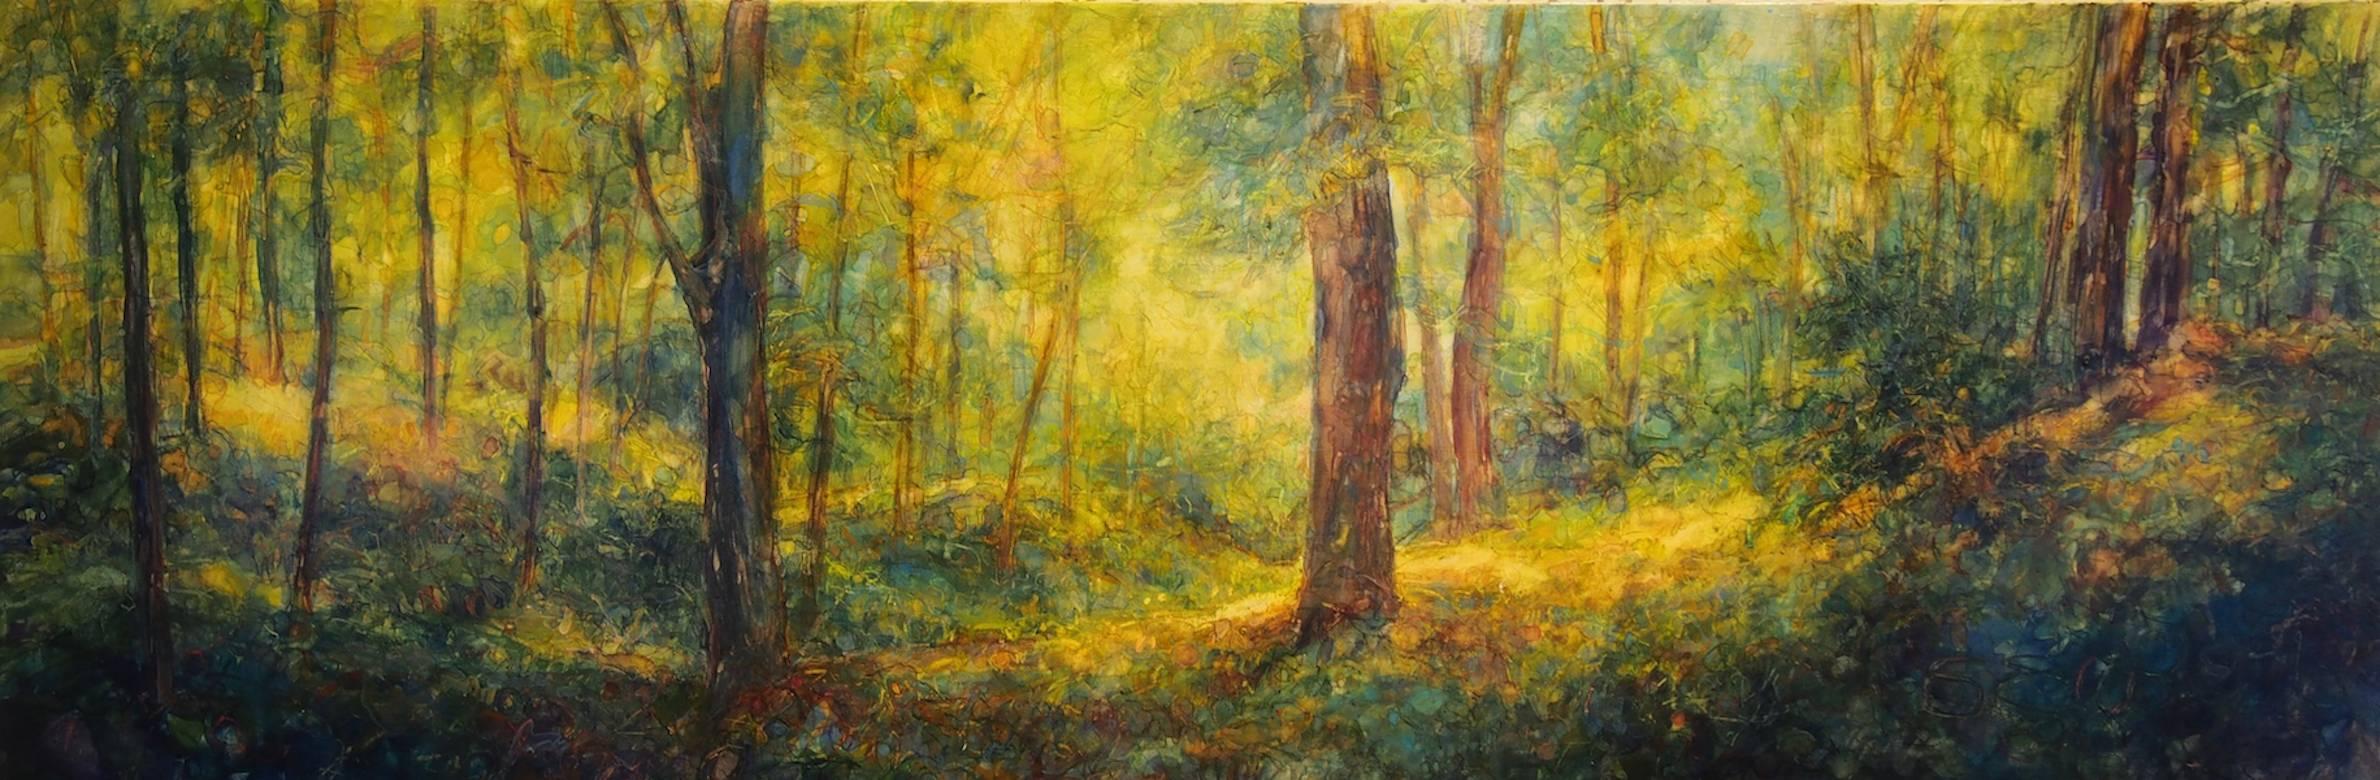 Susan Wahlrab Landscape Painting - Emerald, Varnished Watercolor on Archival Claybord